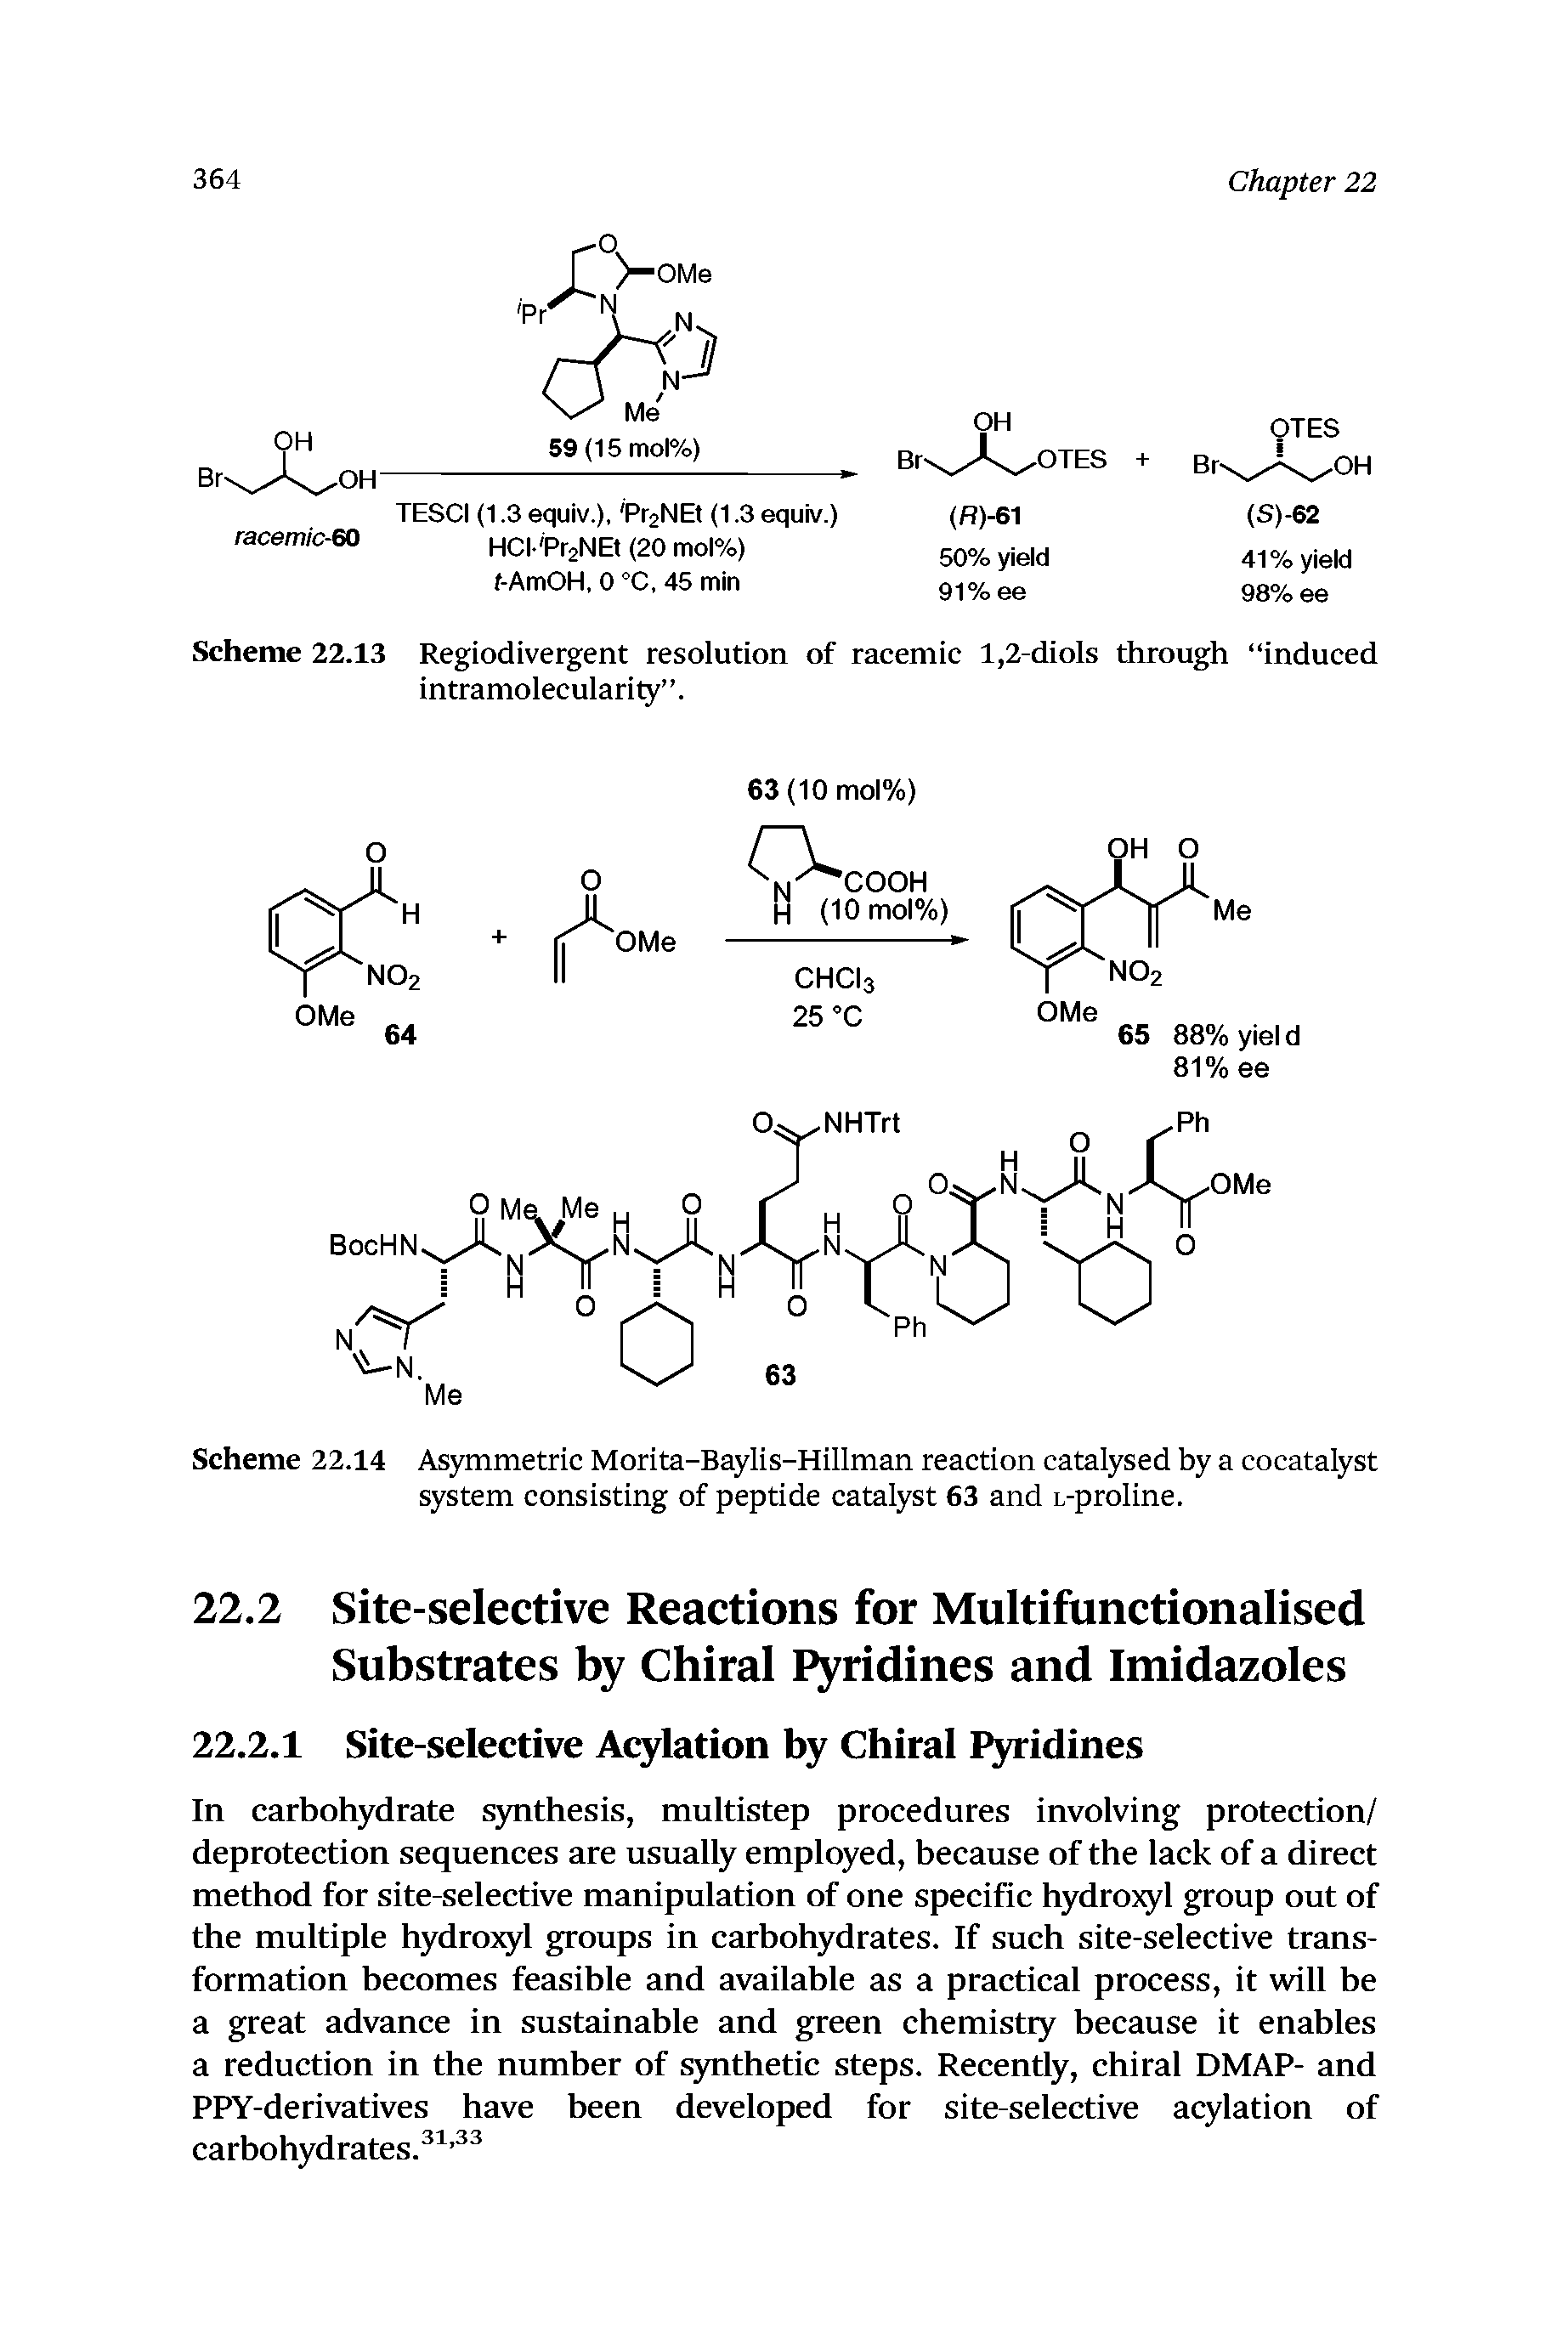 Scheme 22.14 Asymmetric Morita-Baylis-Hillman reaction catalysed by a cocatalyst system consisting of peptide catalyst 63 and t-proline.